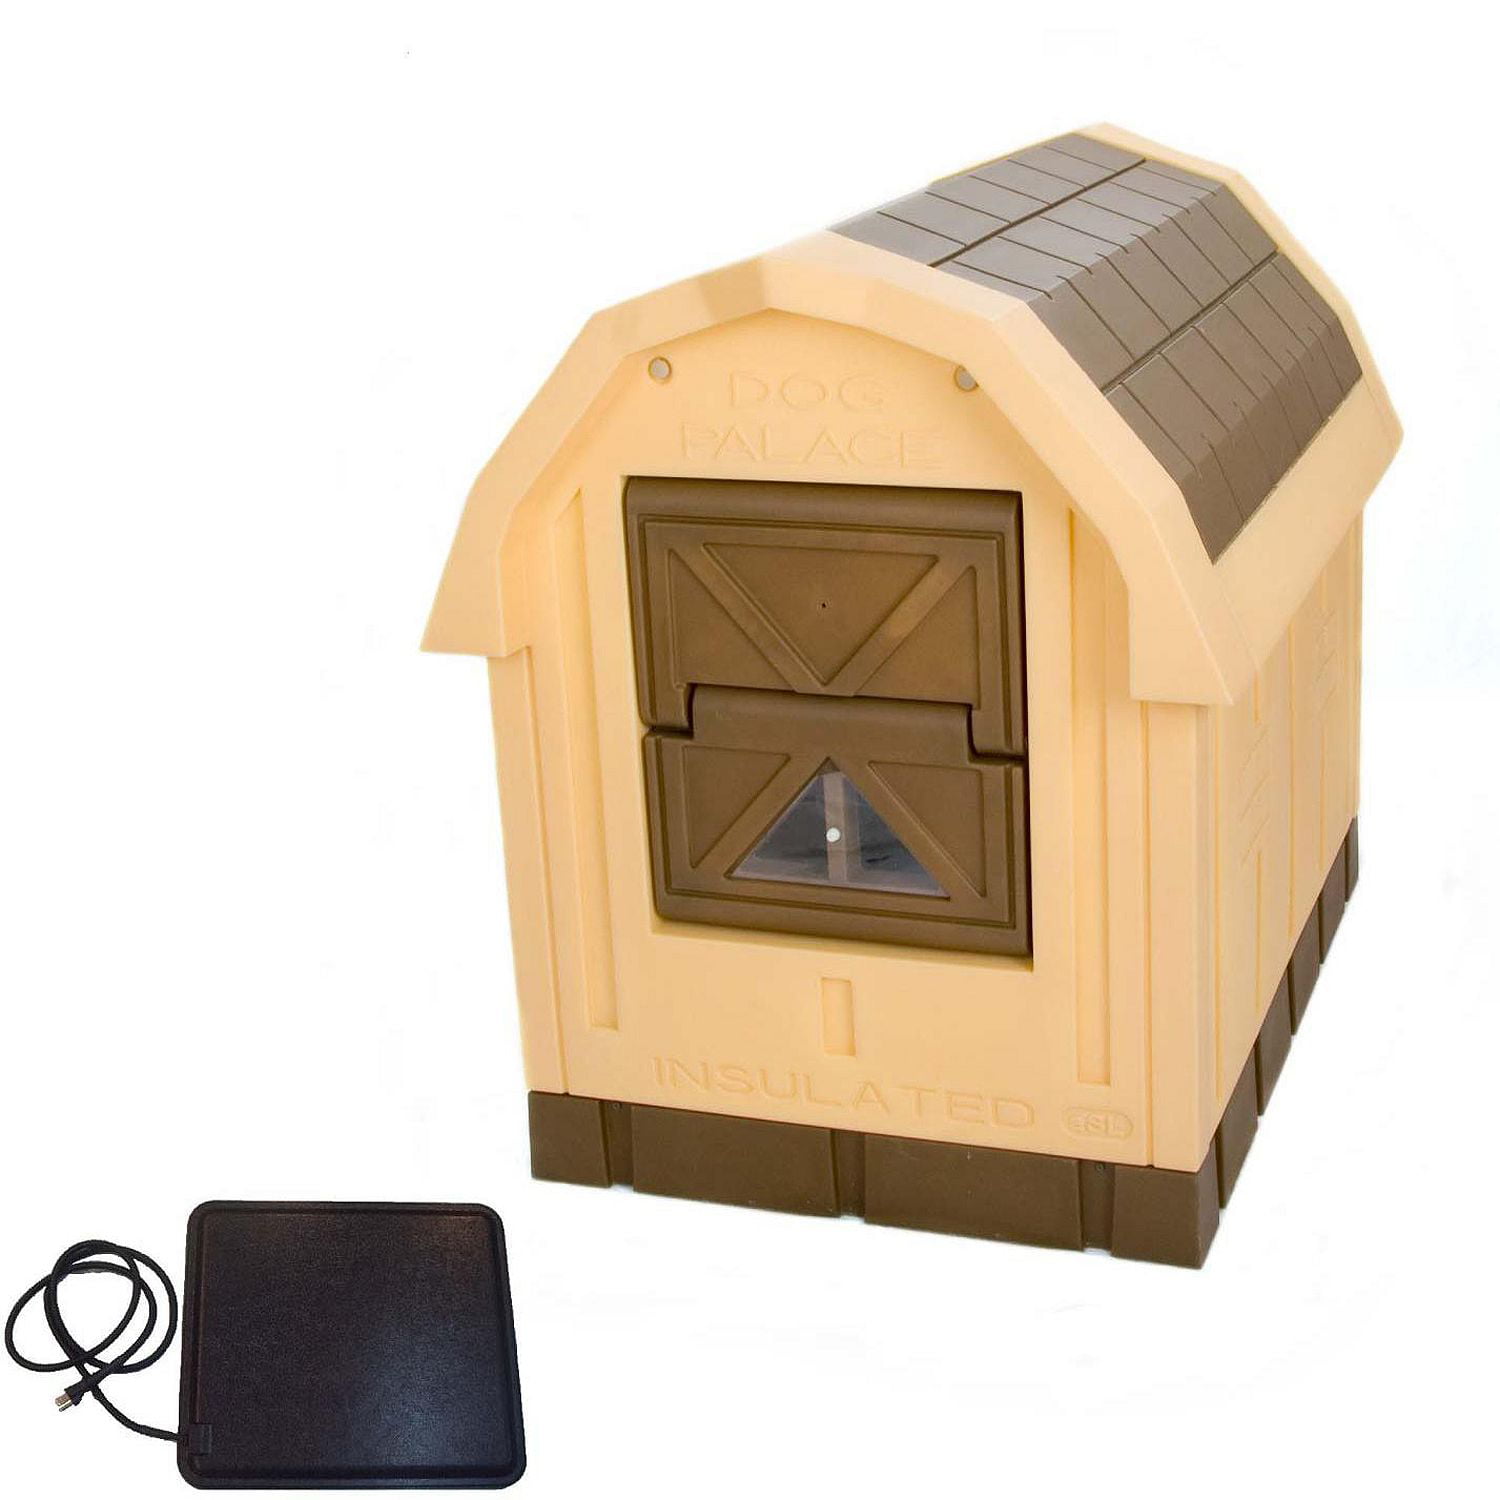 buy insulated dog house